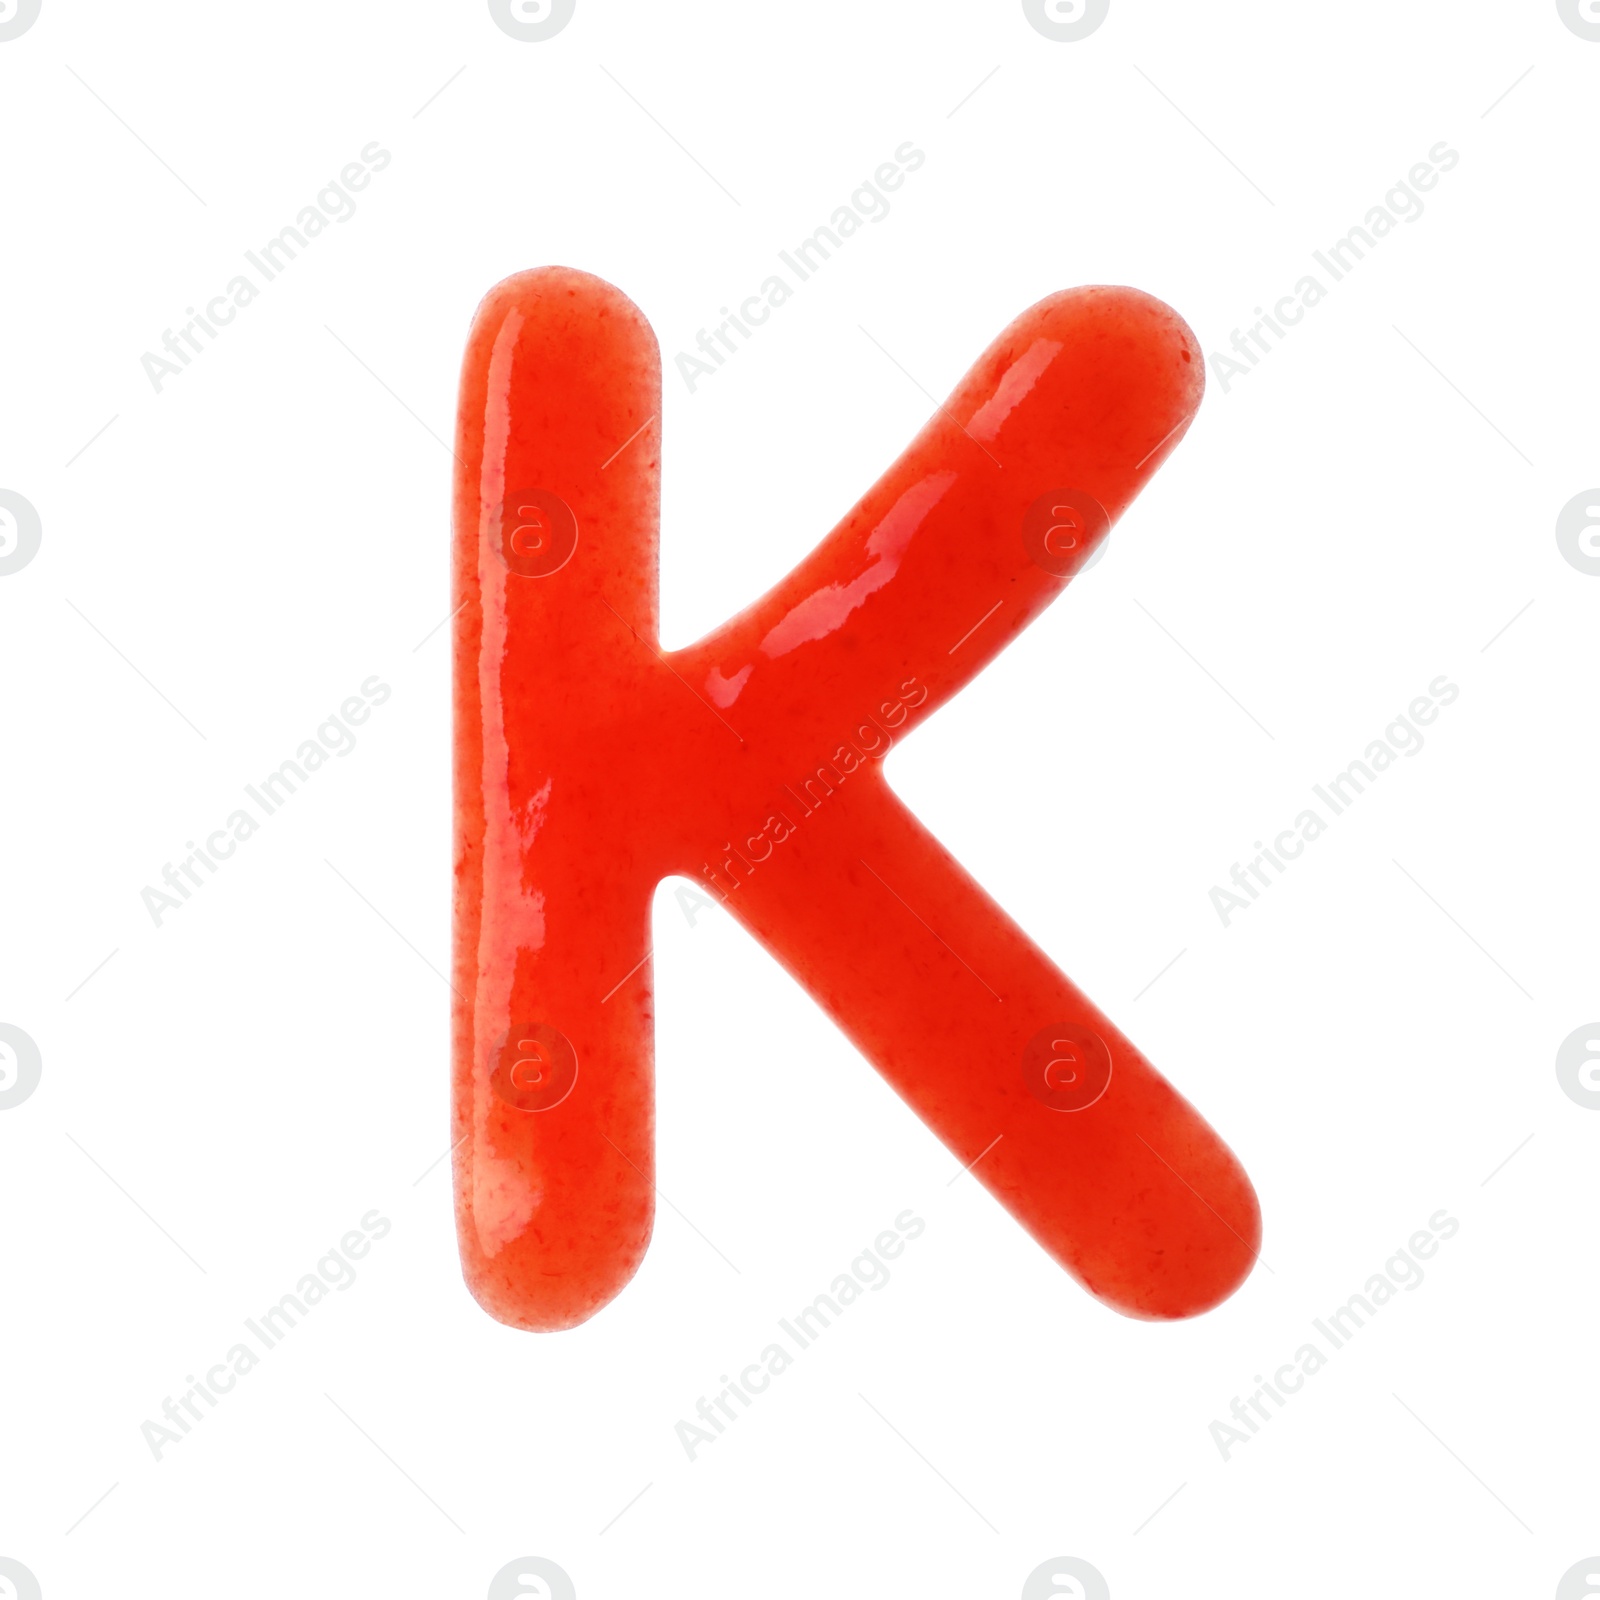 Photo of Letter K written with red sauce on white background